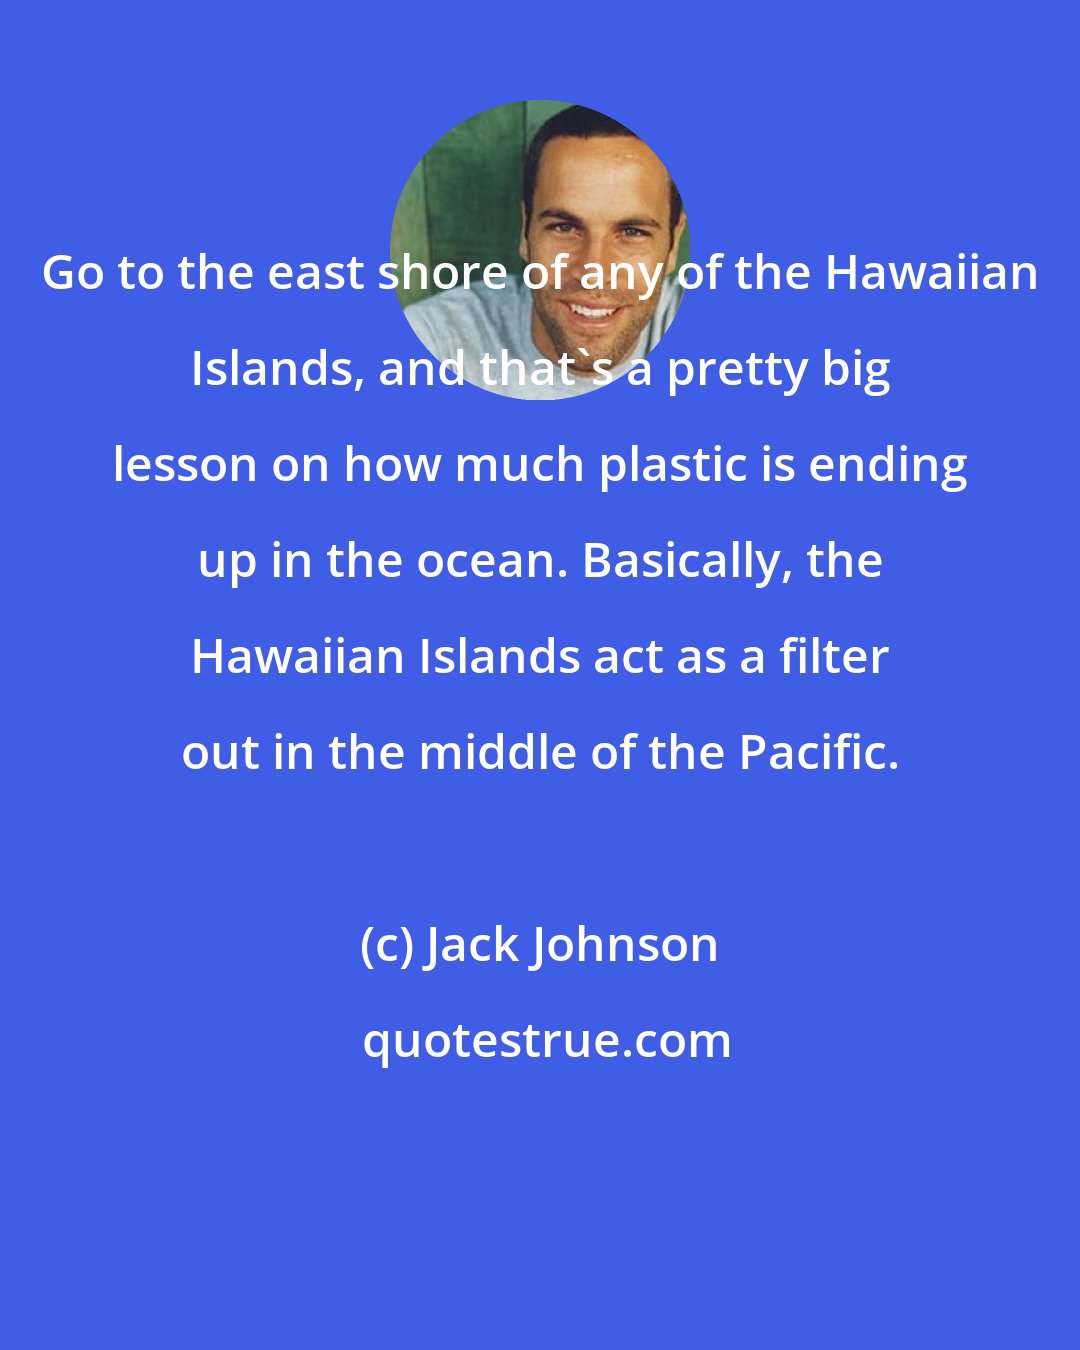 Jack Johnson: Go to the east shore of any of the Hawaiian Islands, and that's a pretty big lesson on how much plastic is ending up in the ocean. Basically, the Hawaiian Islands act as a filter out in the middle of the Pacific.